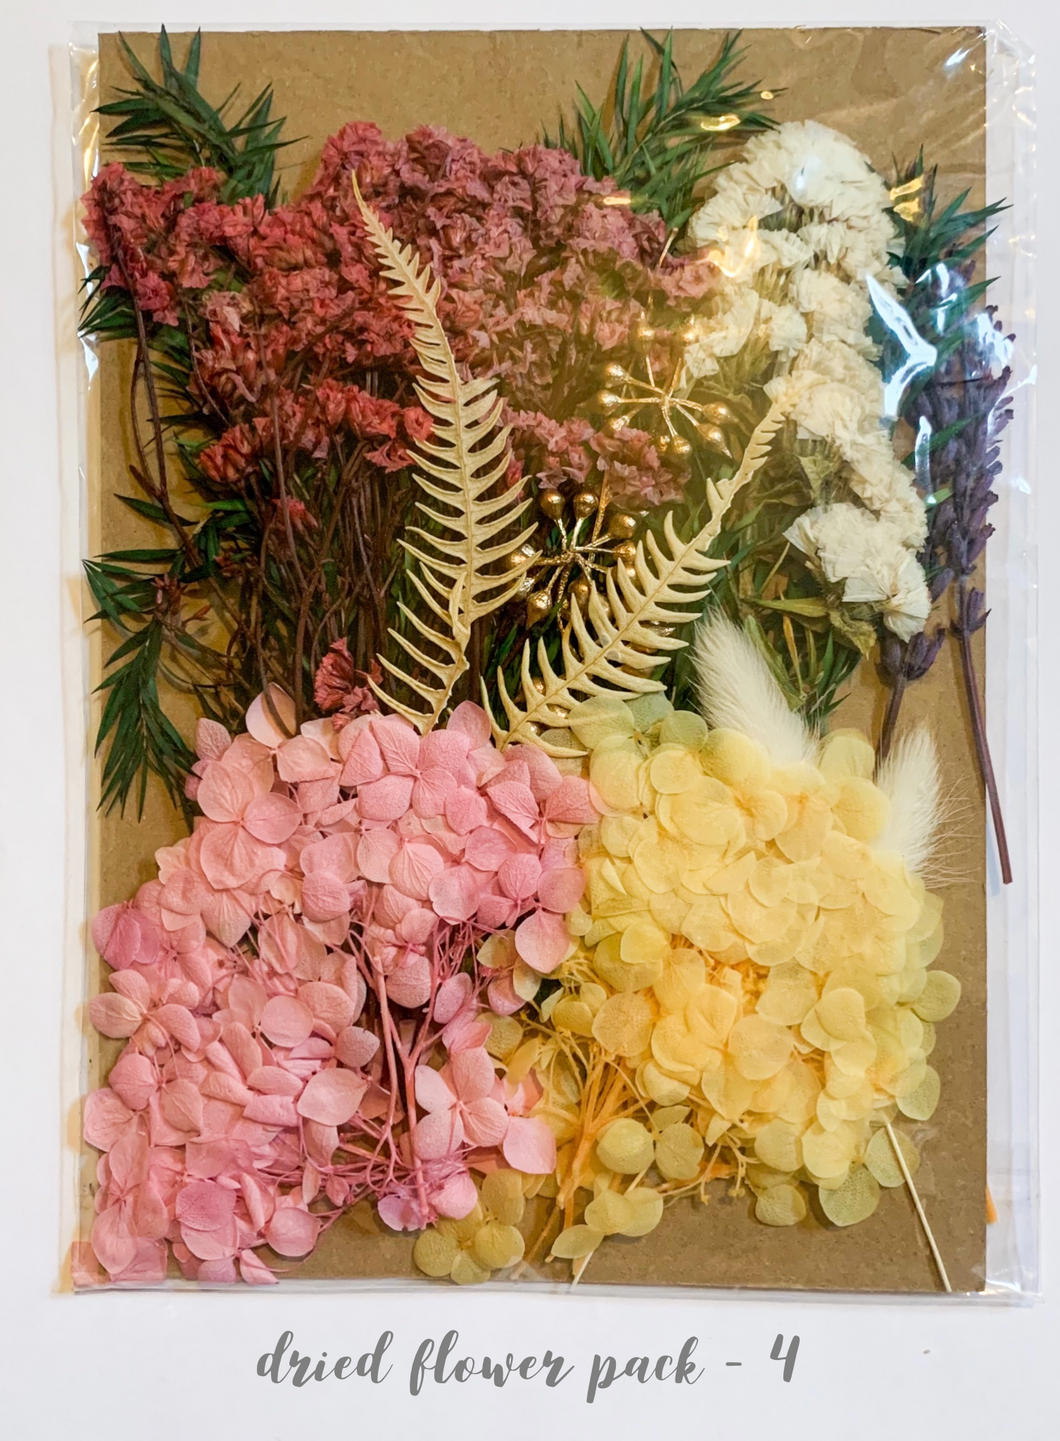 Dried Flower Pack 4